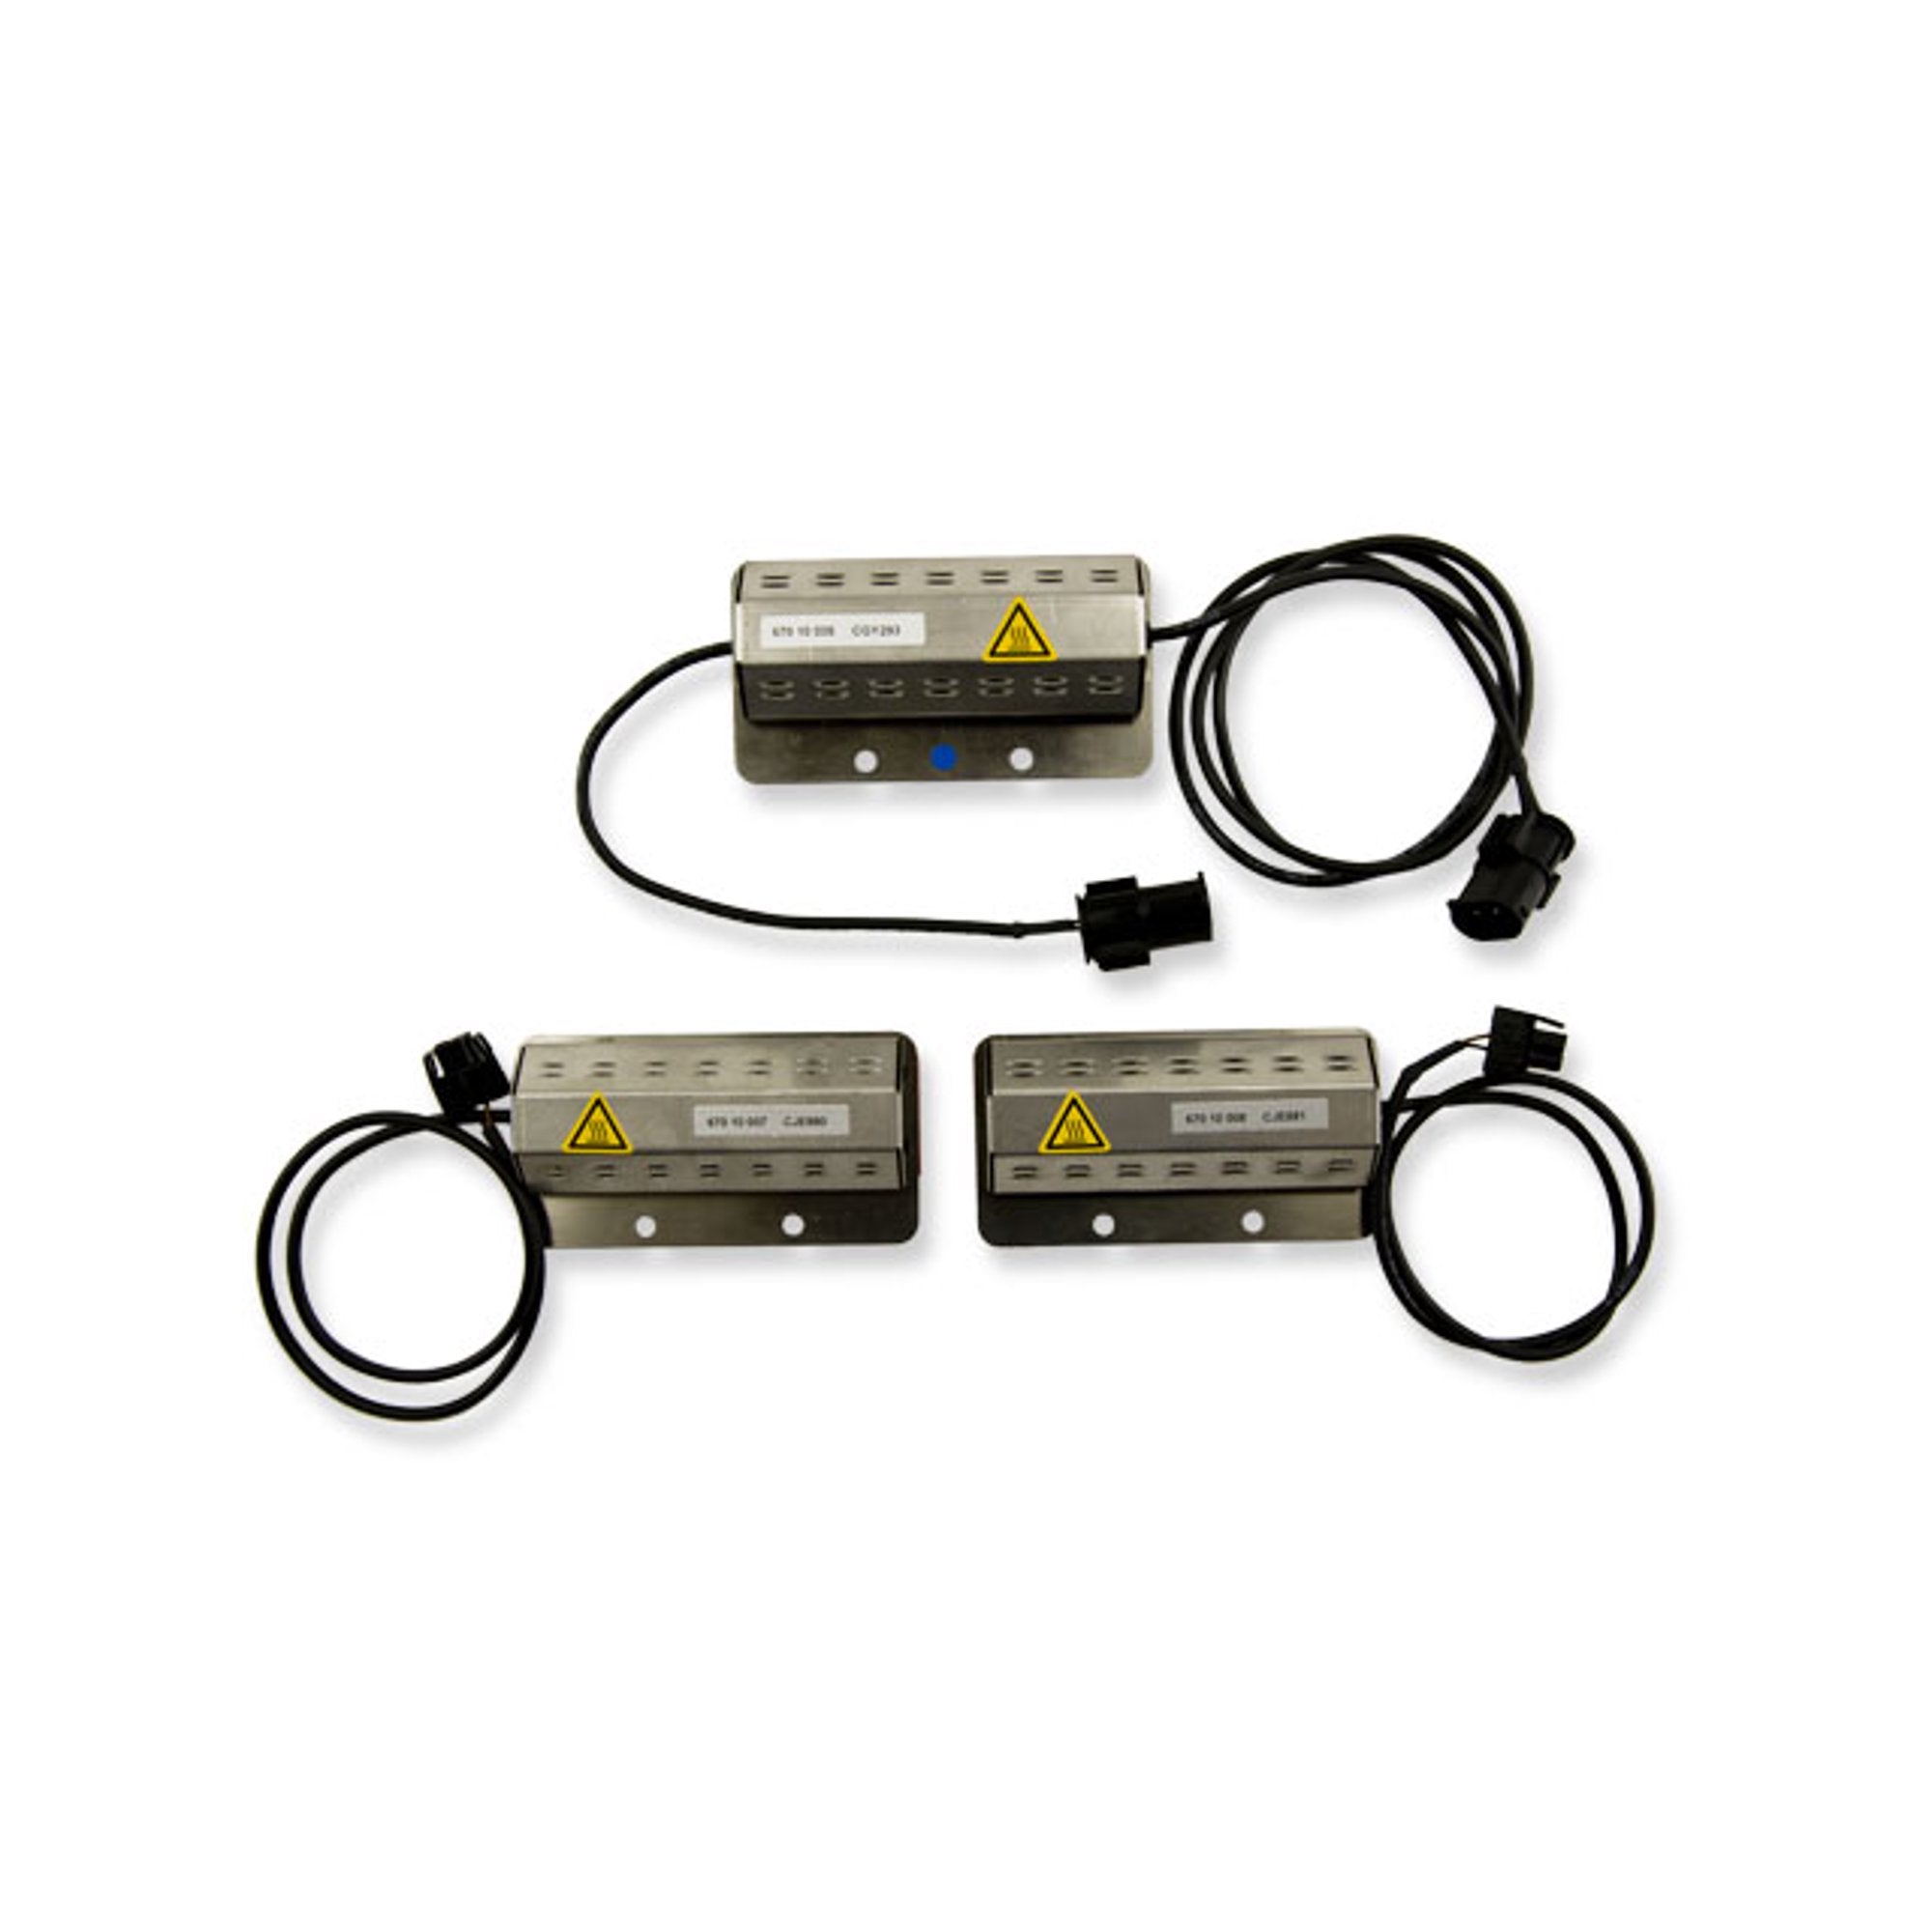 KW Electronic Damping Cancellation Kit Audi A3 / S3 Type 8P